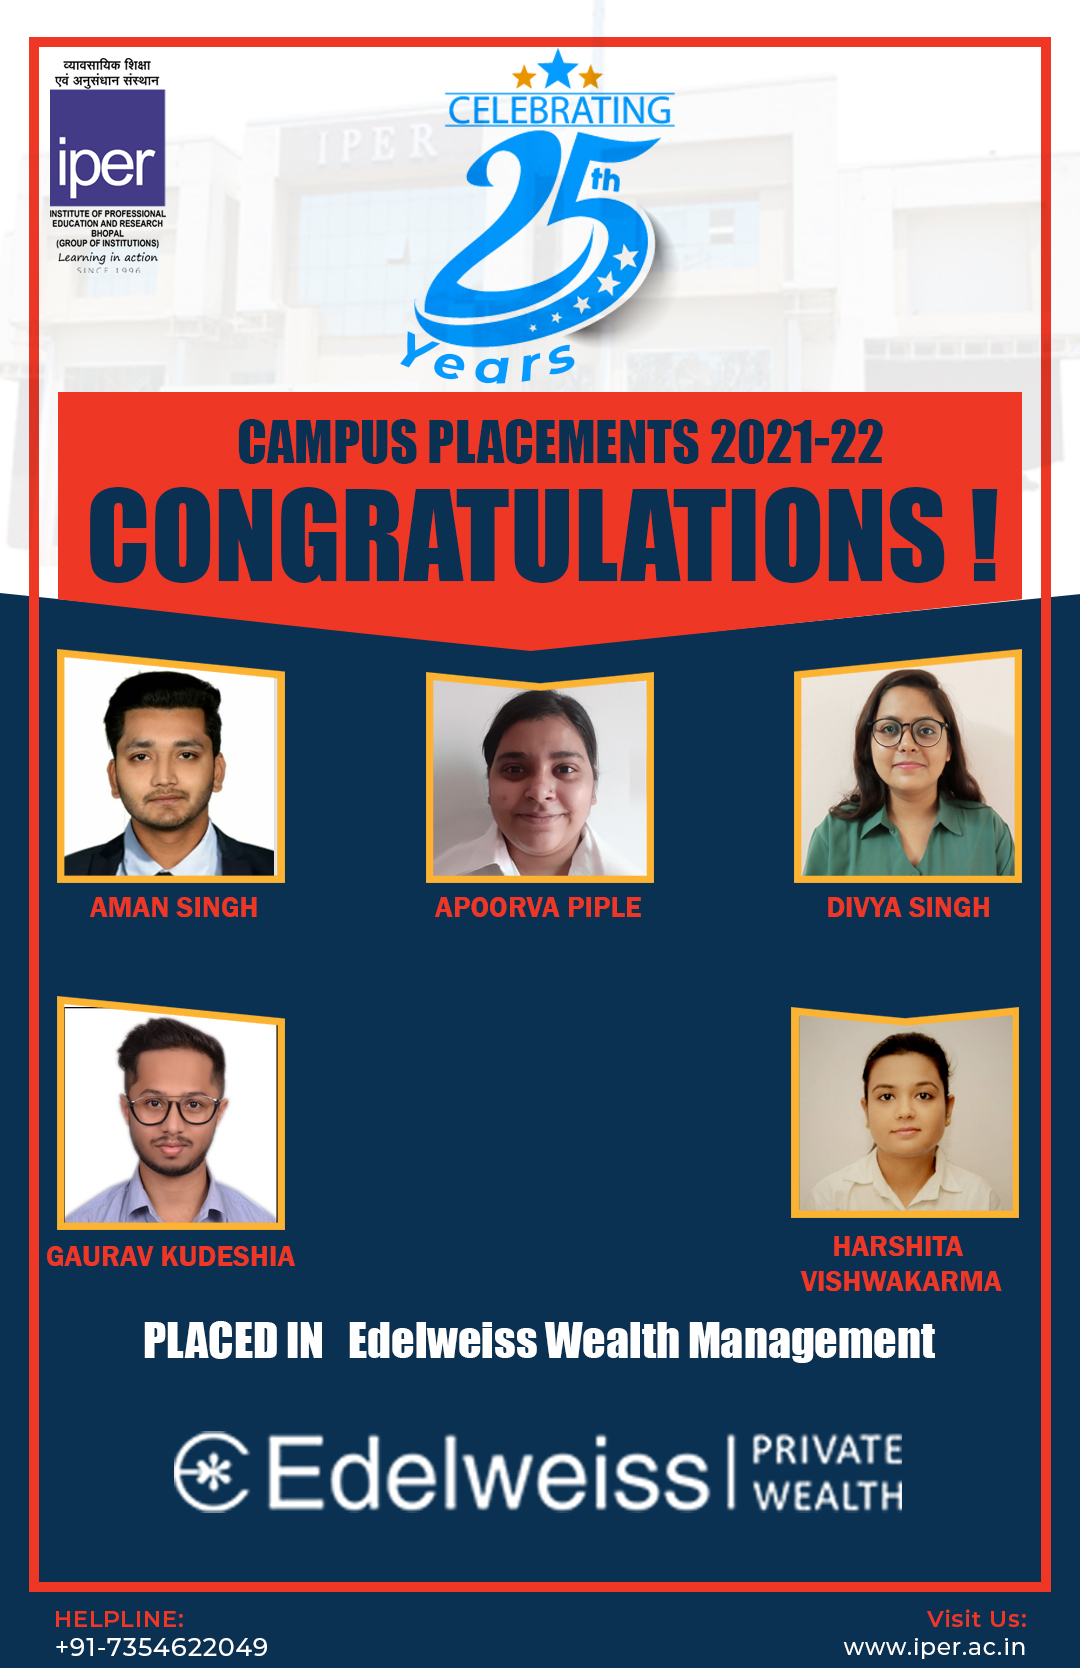 CAMPUS PLACEMENTS 2021-22 (Layout 1) Edelweiss General Insurance Co.Ltd.